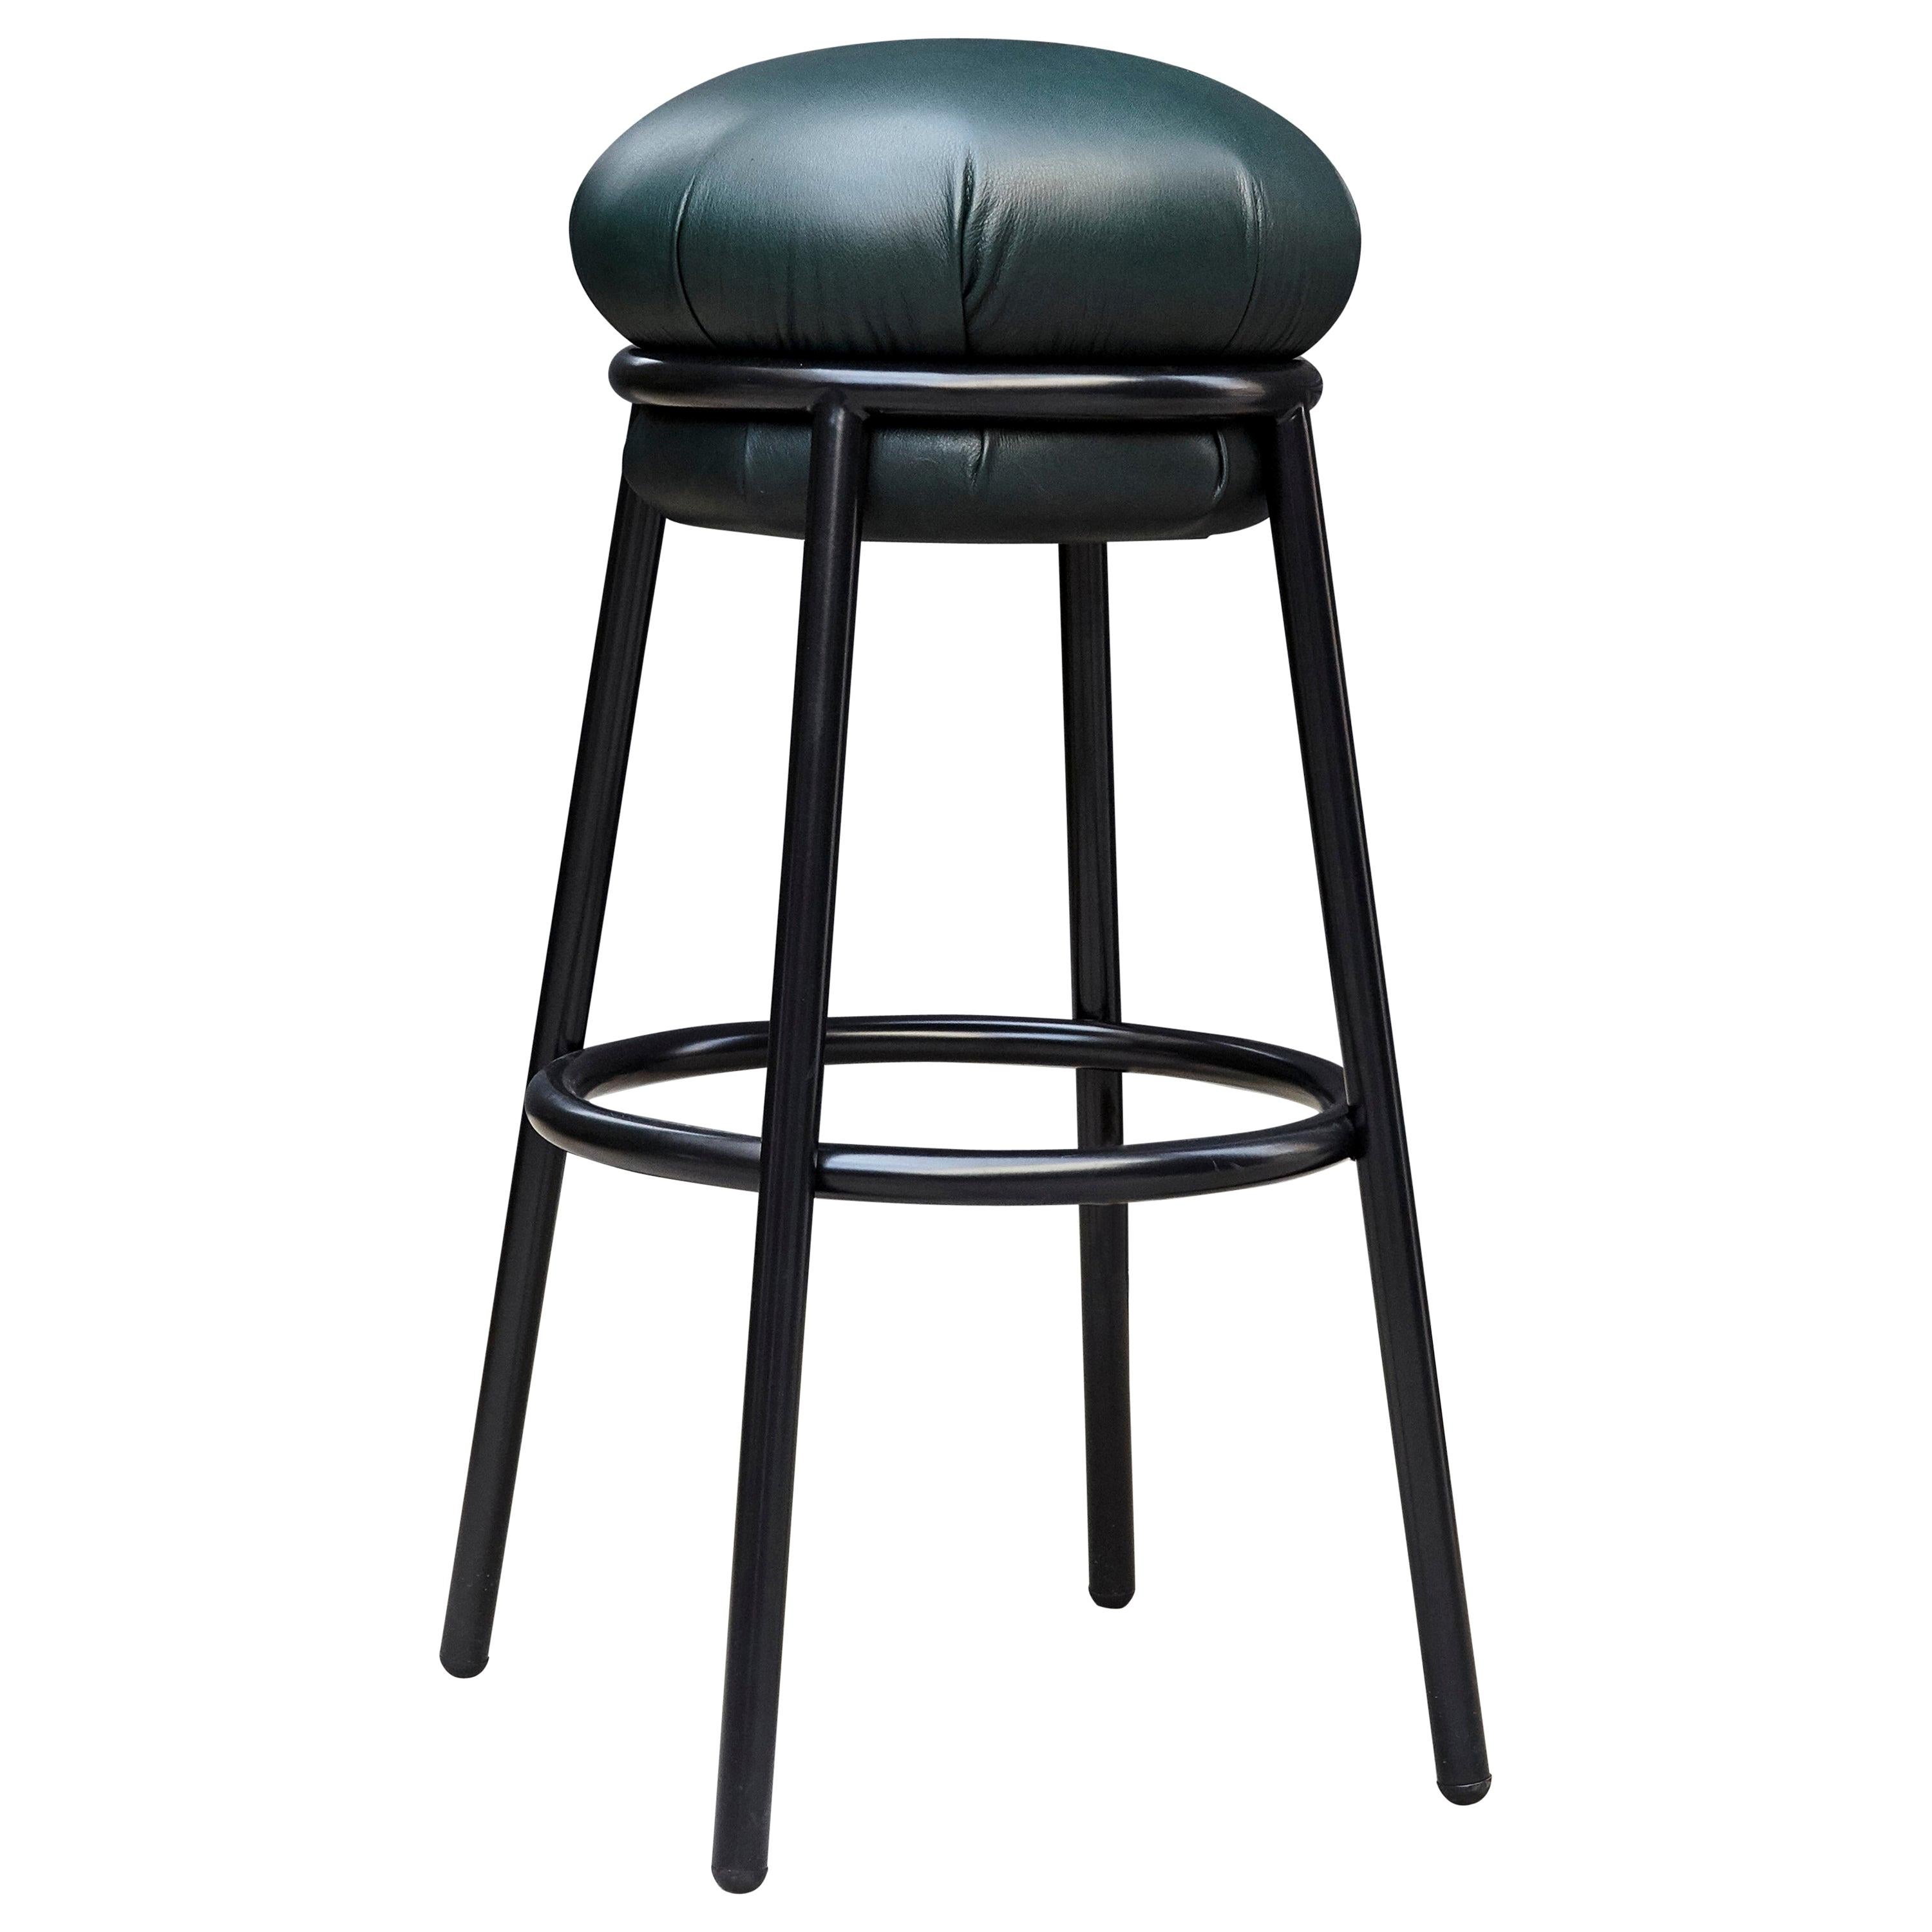 Stephen Burks Grasso Contemporary Green Leather, Black Lacquered Metal Stool